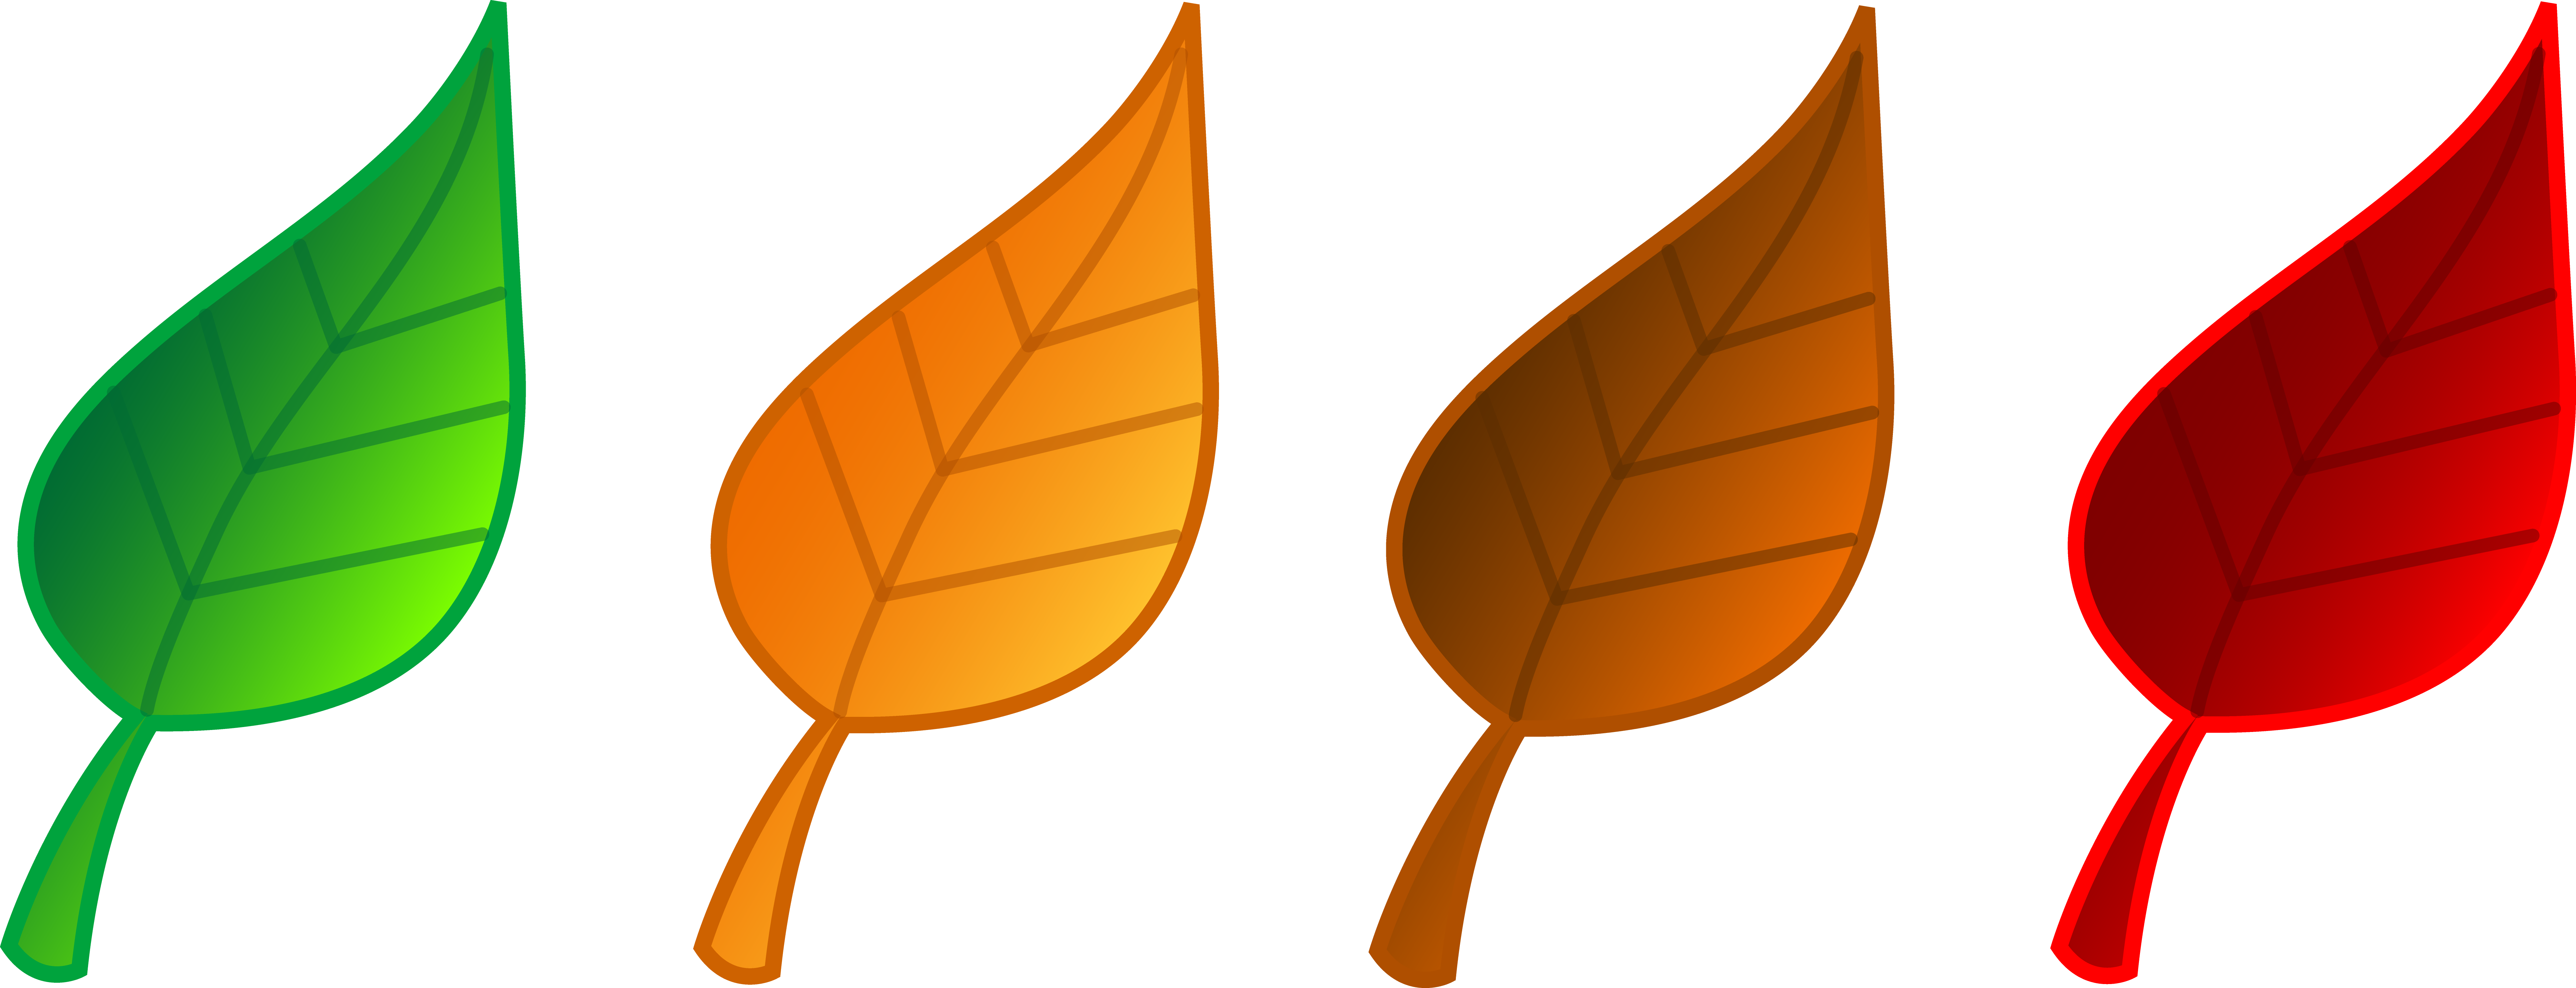 free clipart tree leaves - photo #40